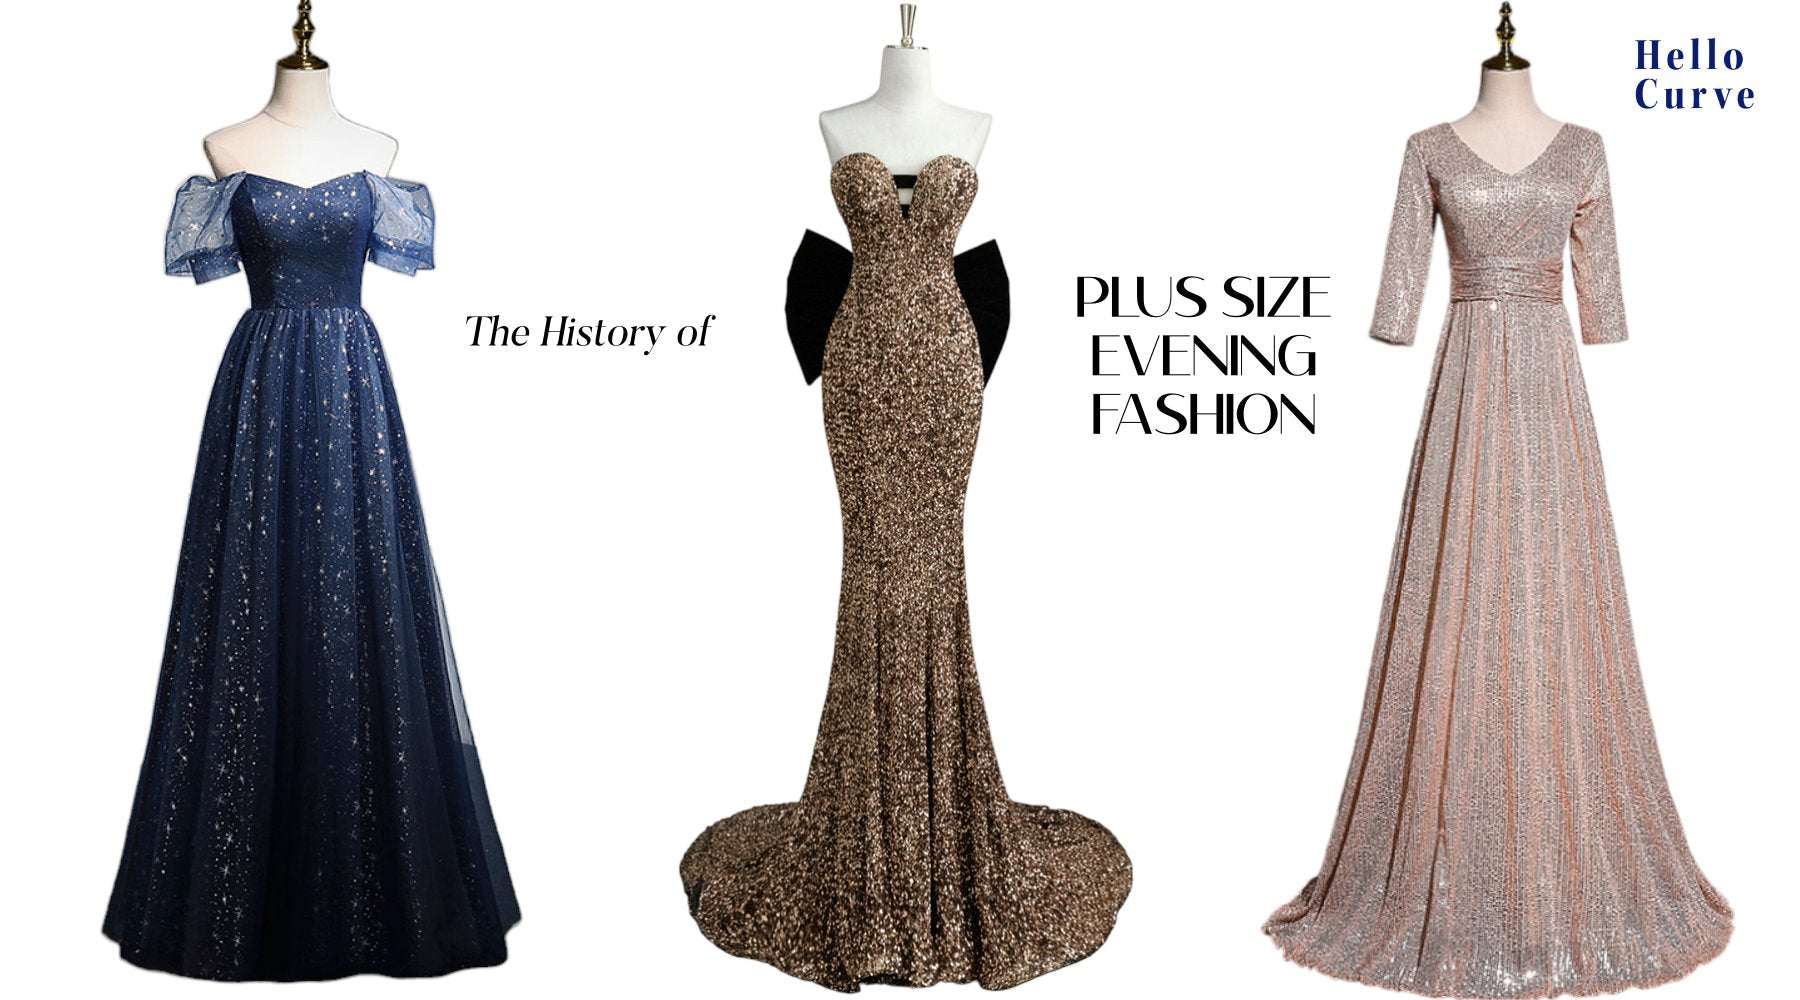 The History of Plus-Size Evening Fashion: From Constrained Corsets to Empowering Elegance